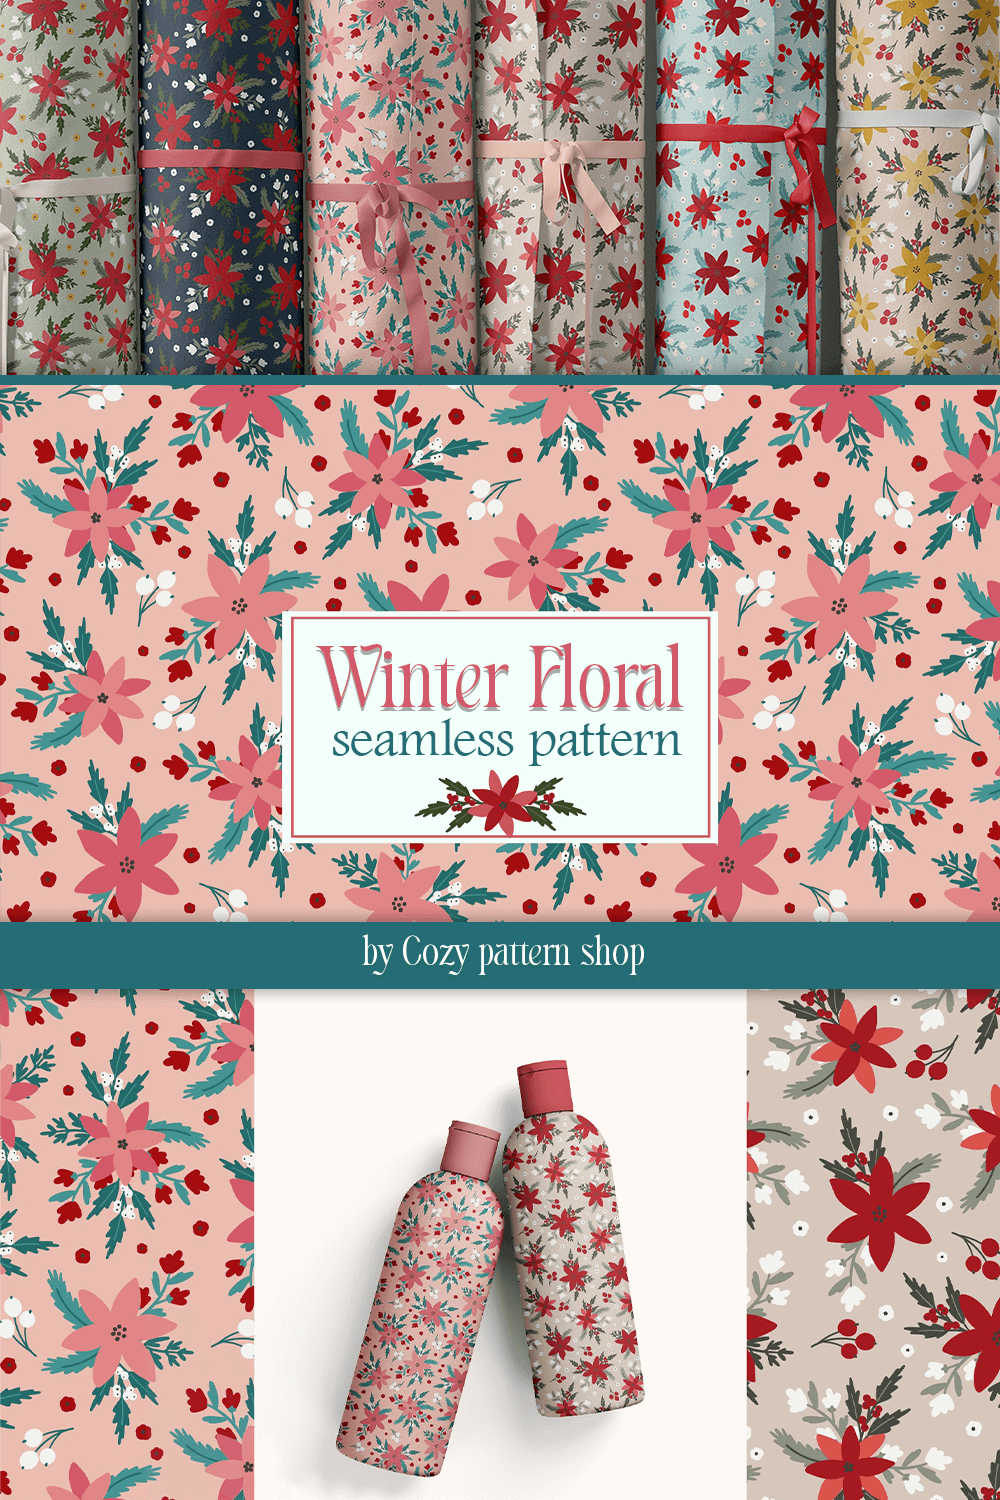 Options for using samples of winter flora seamless pattern.